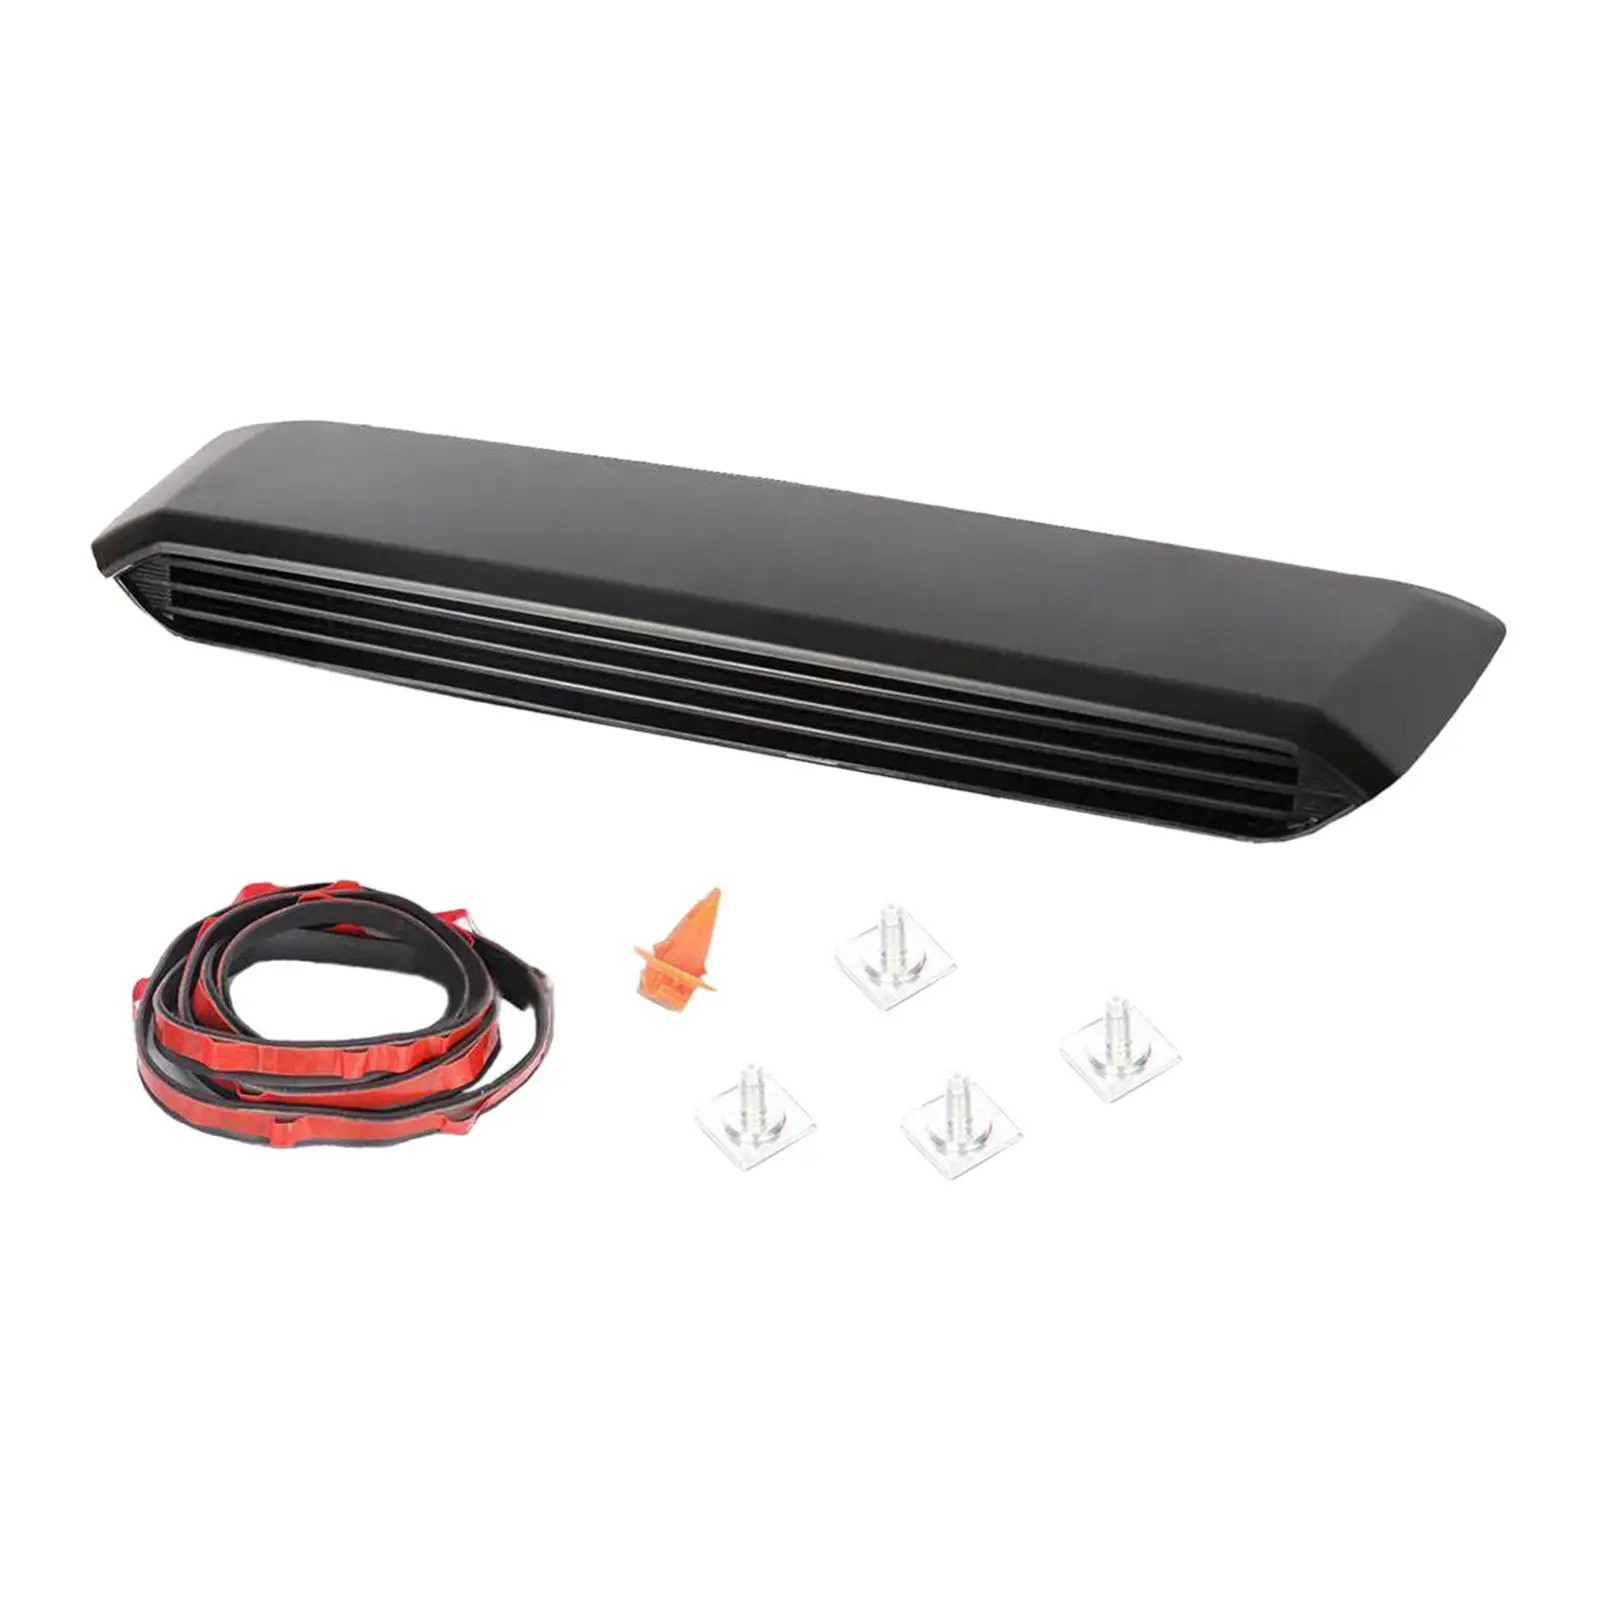 76181-04900, Hood Scoop Kit, Easy to Install, Spare Parts, Premium Car